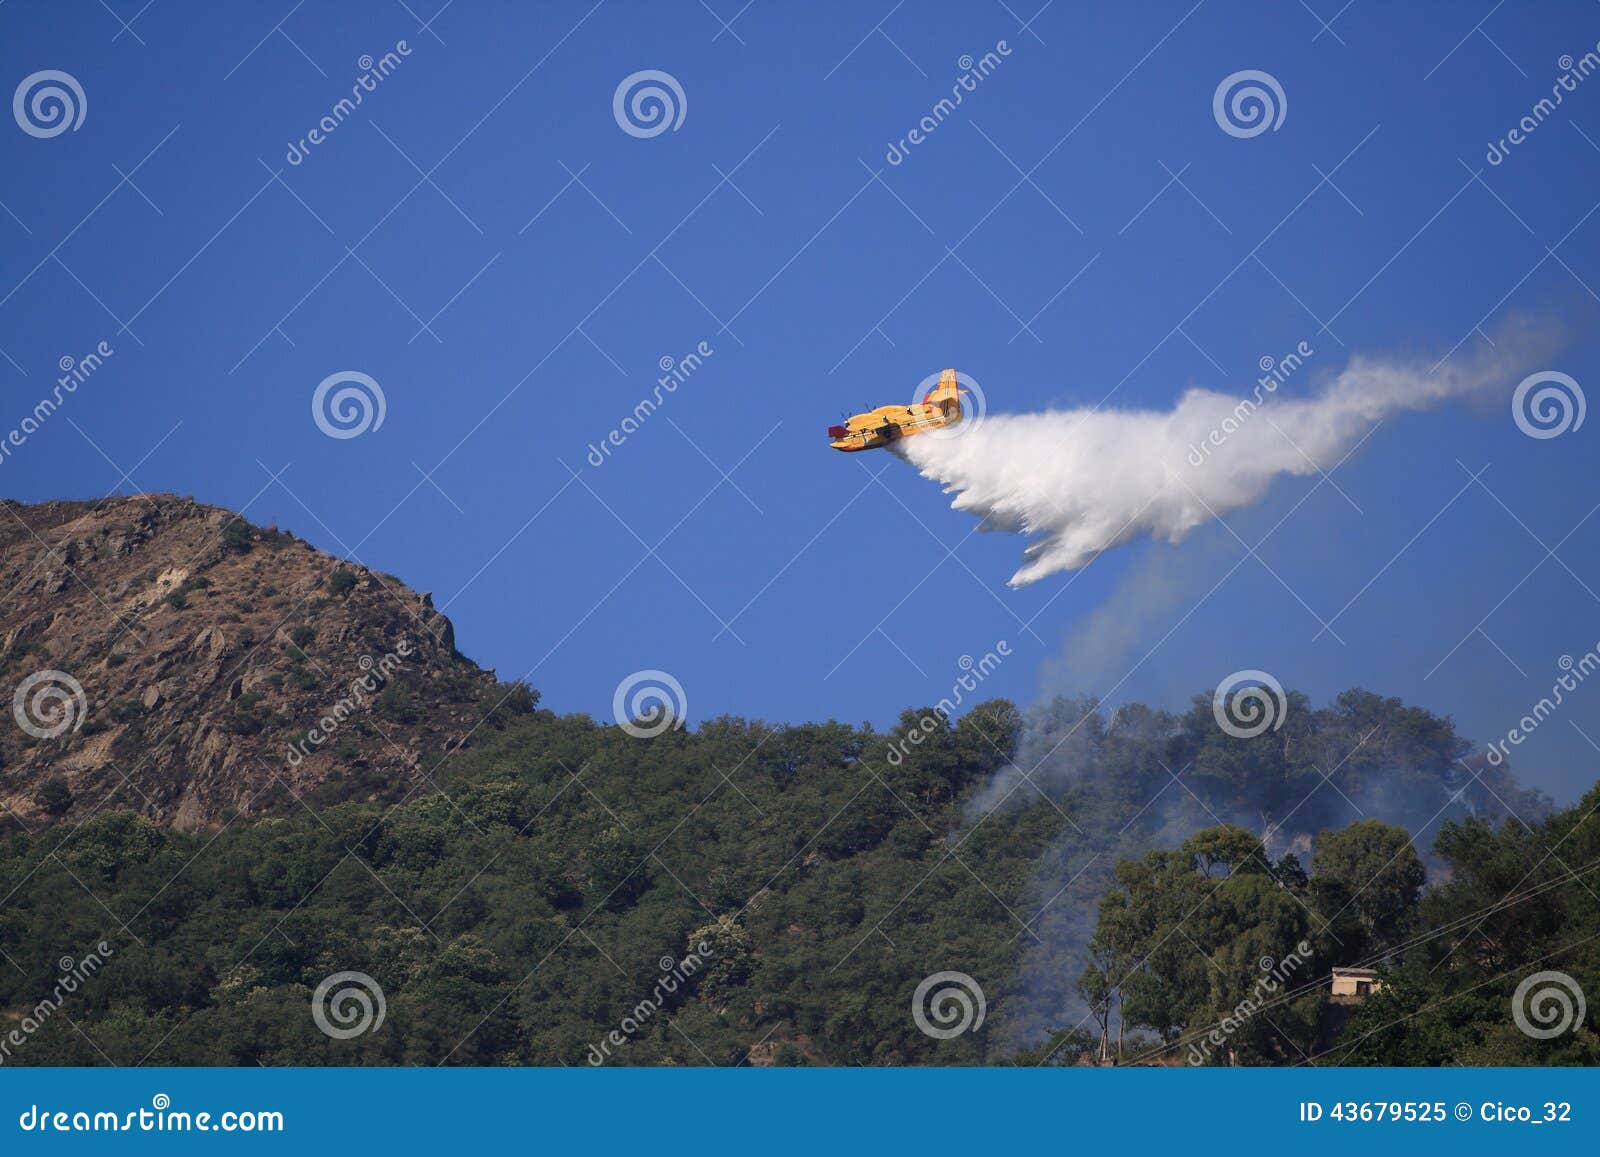 canadair plane to fire